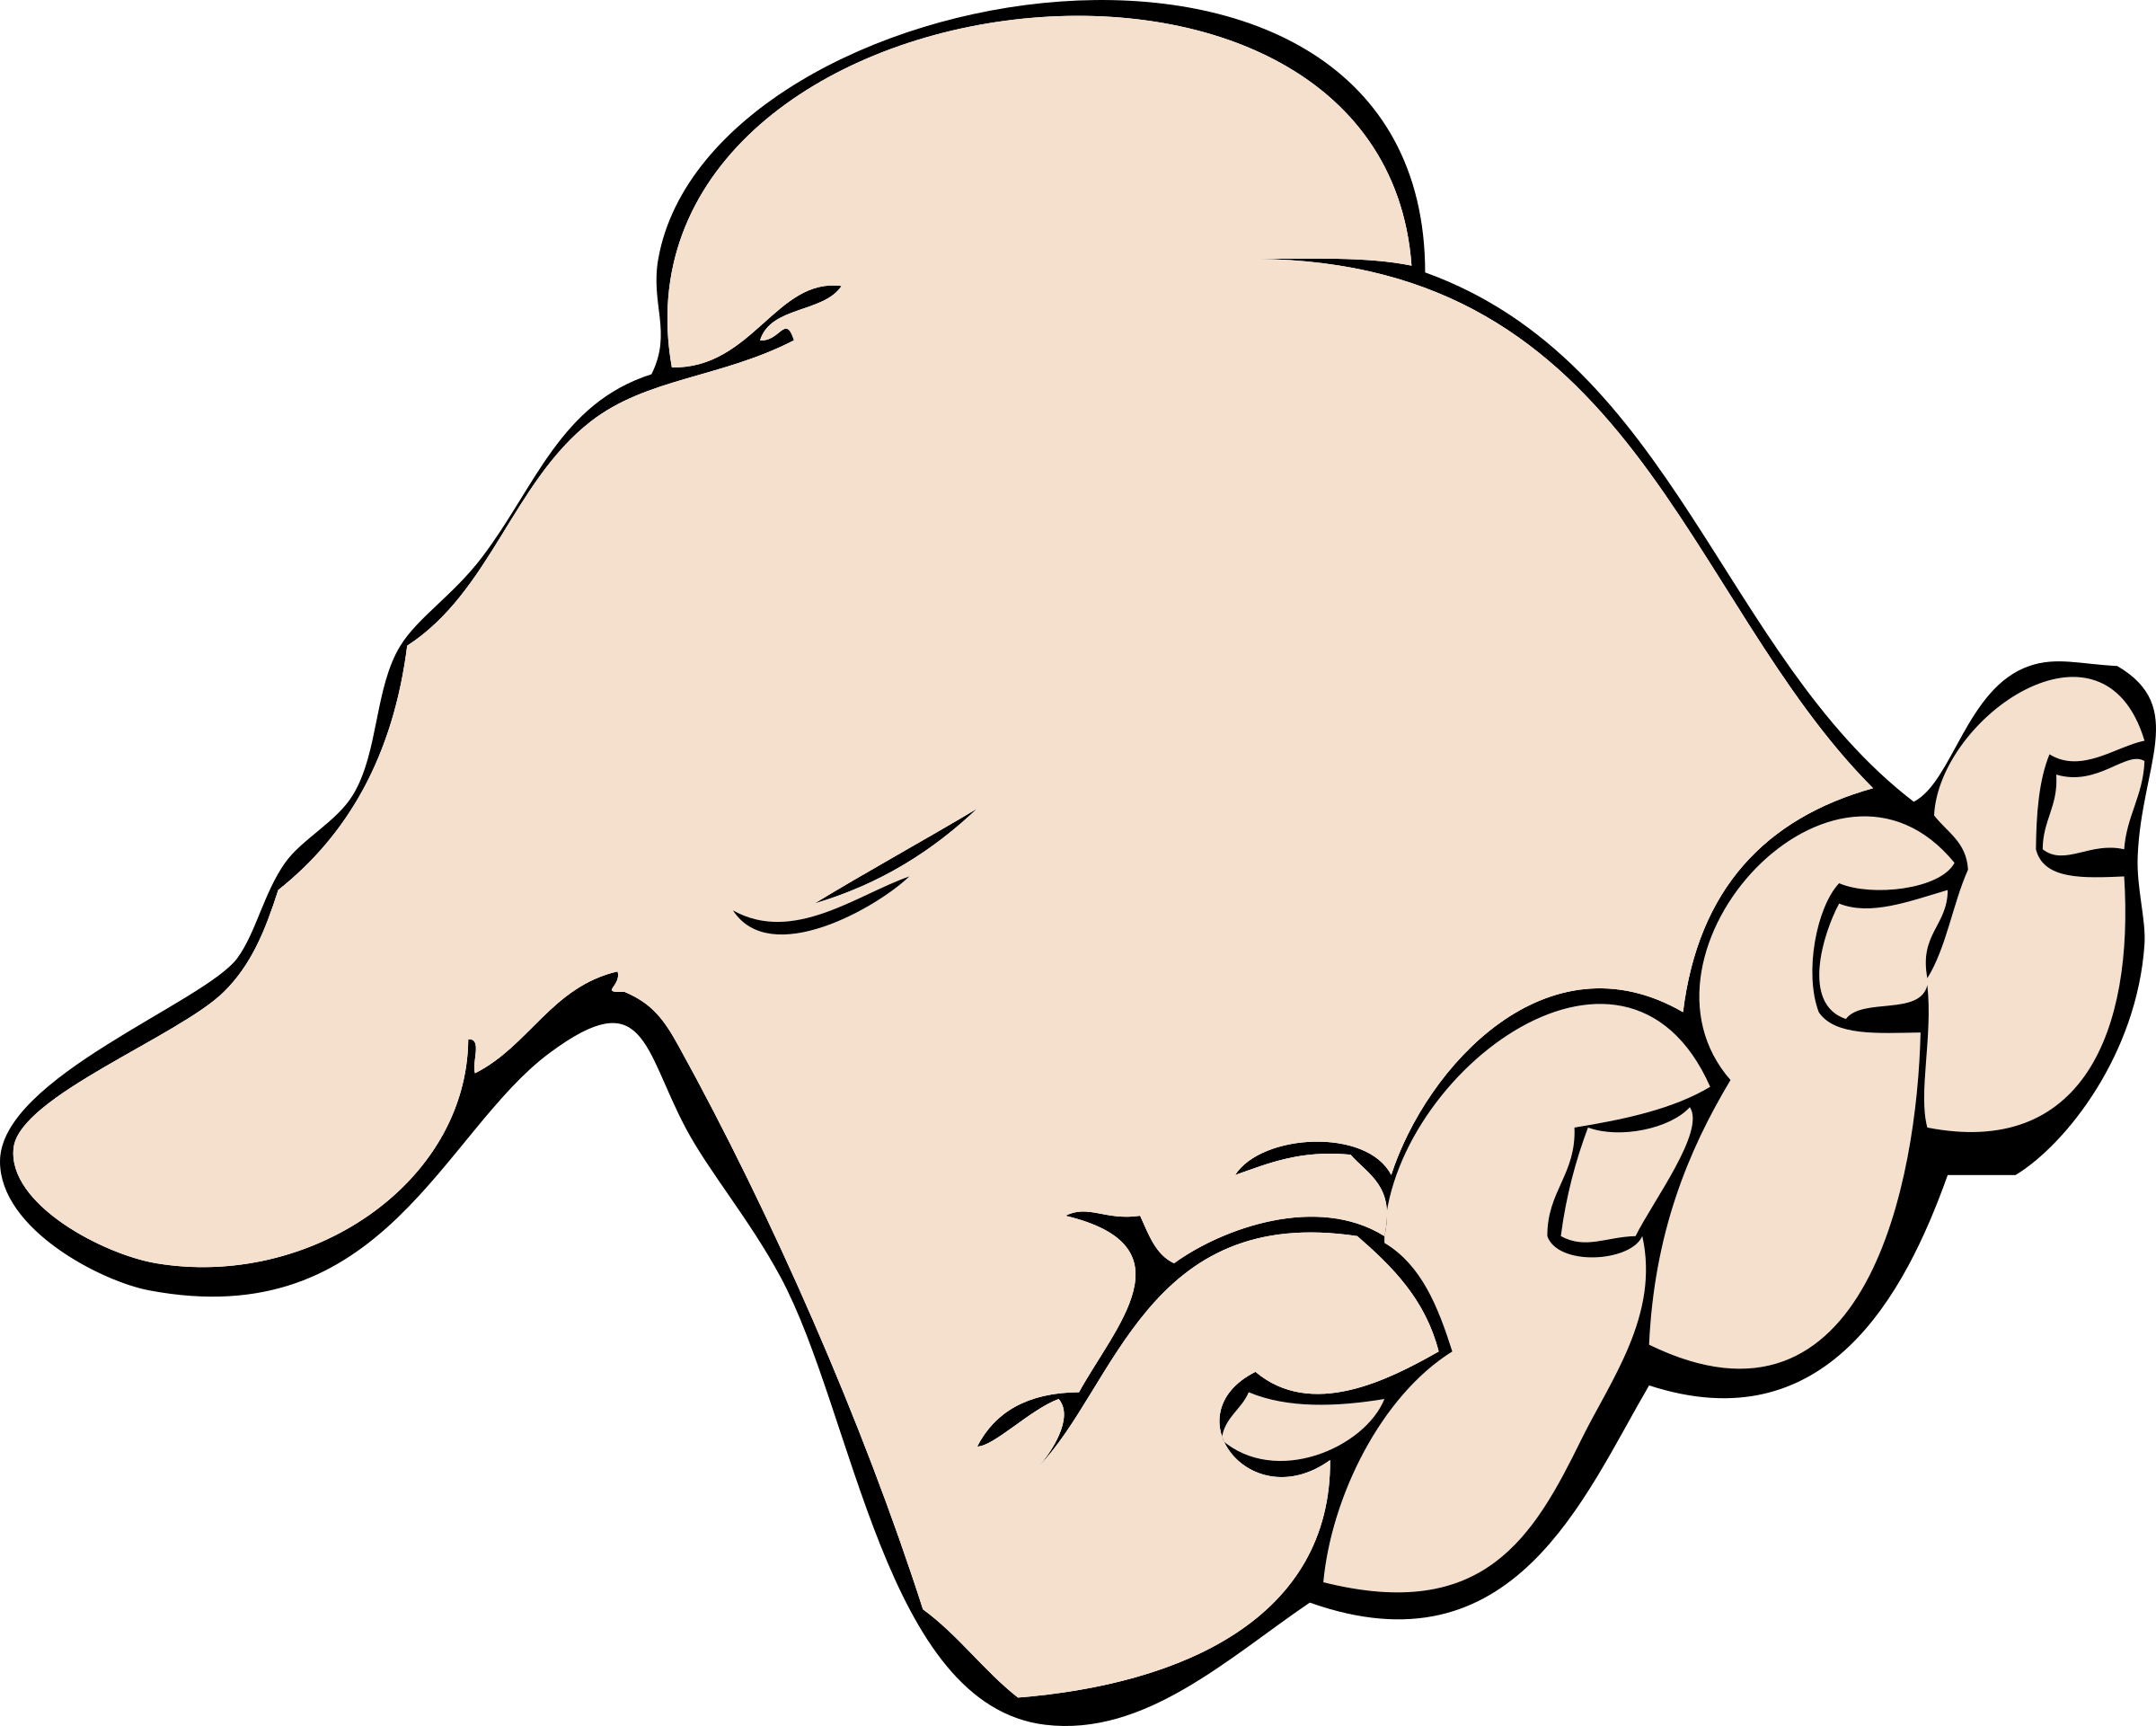 Hands clipart clapping. Empty open hand icons